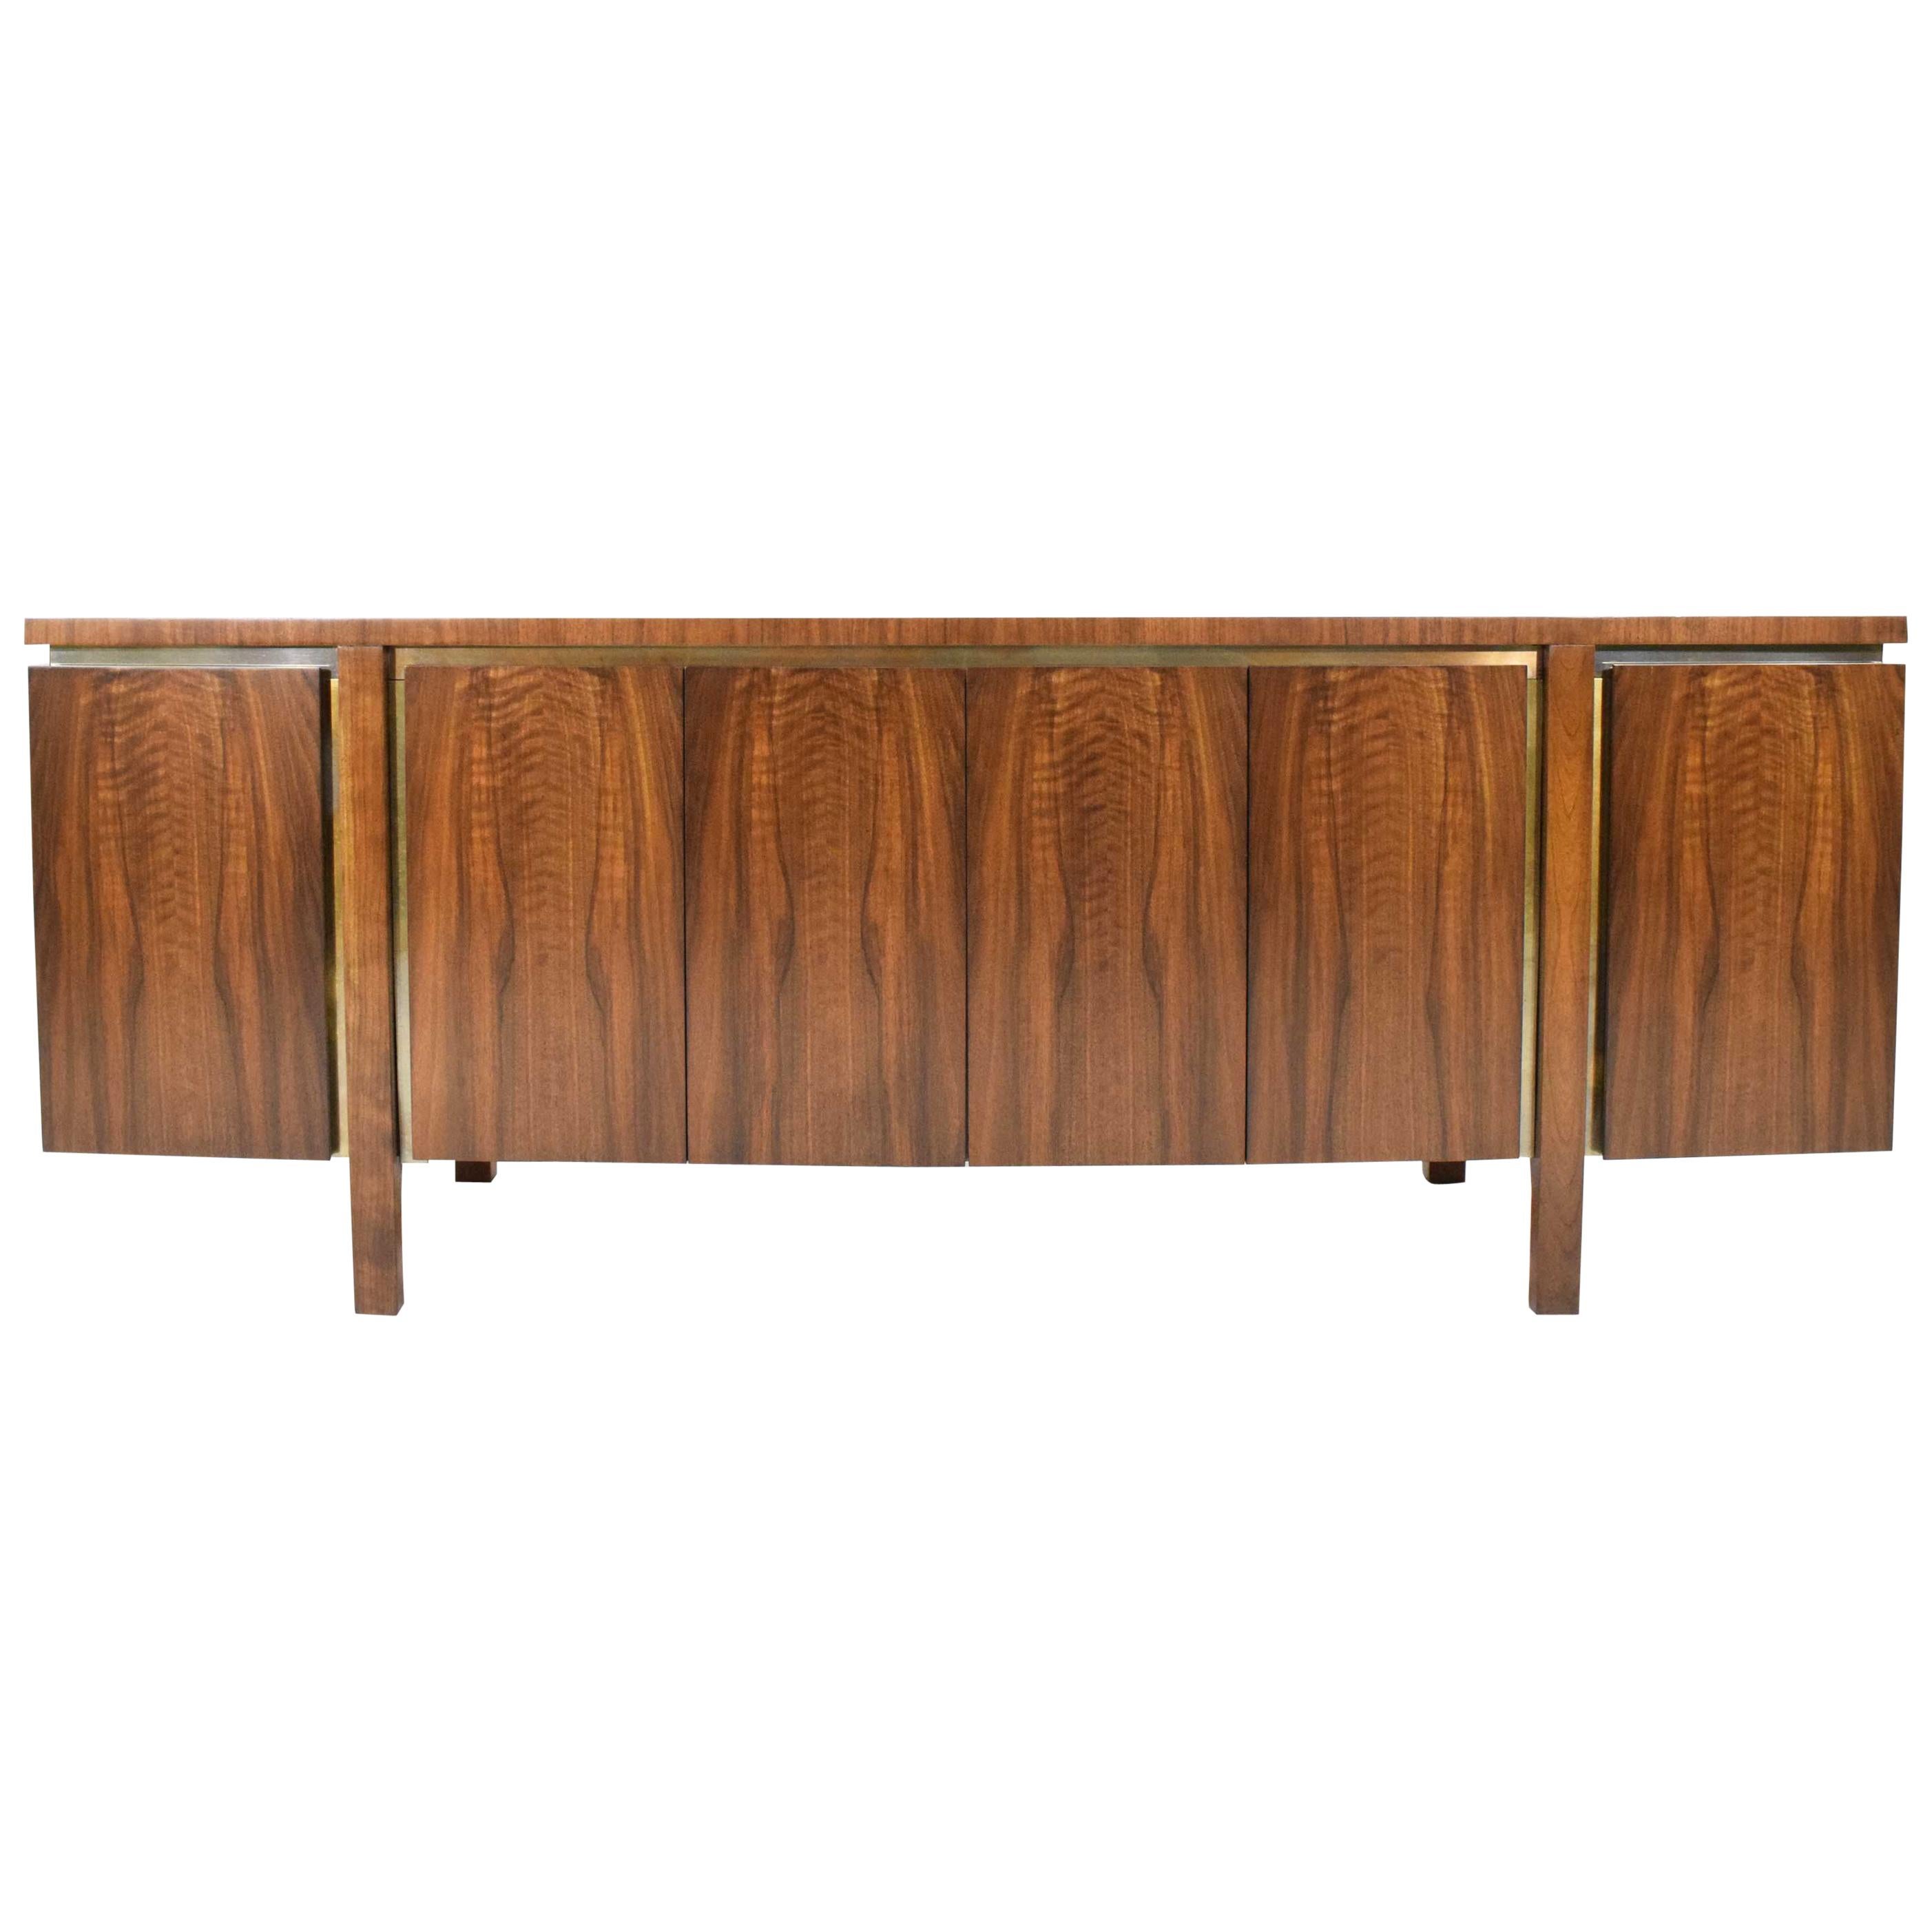 Widdicomb Credenza or Sideboard in Walnut with Parquet Patterned Top